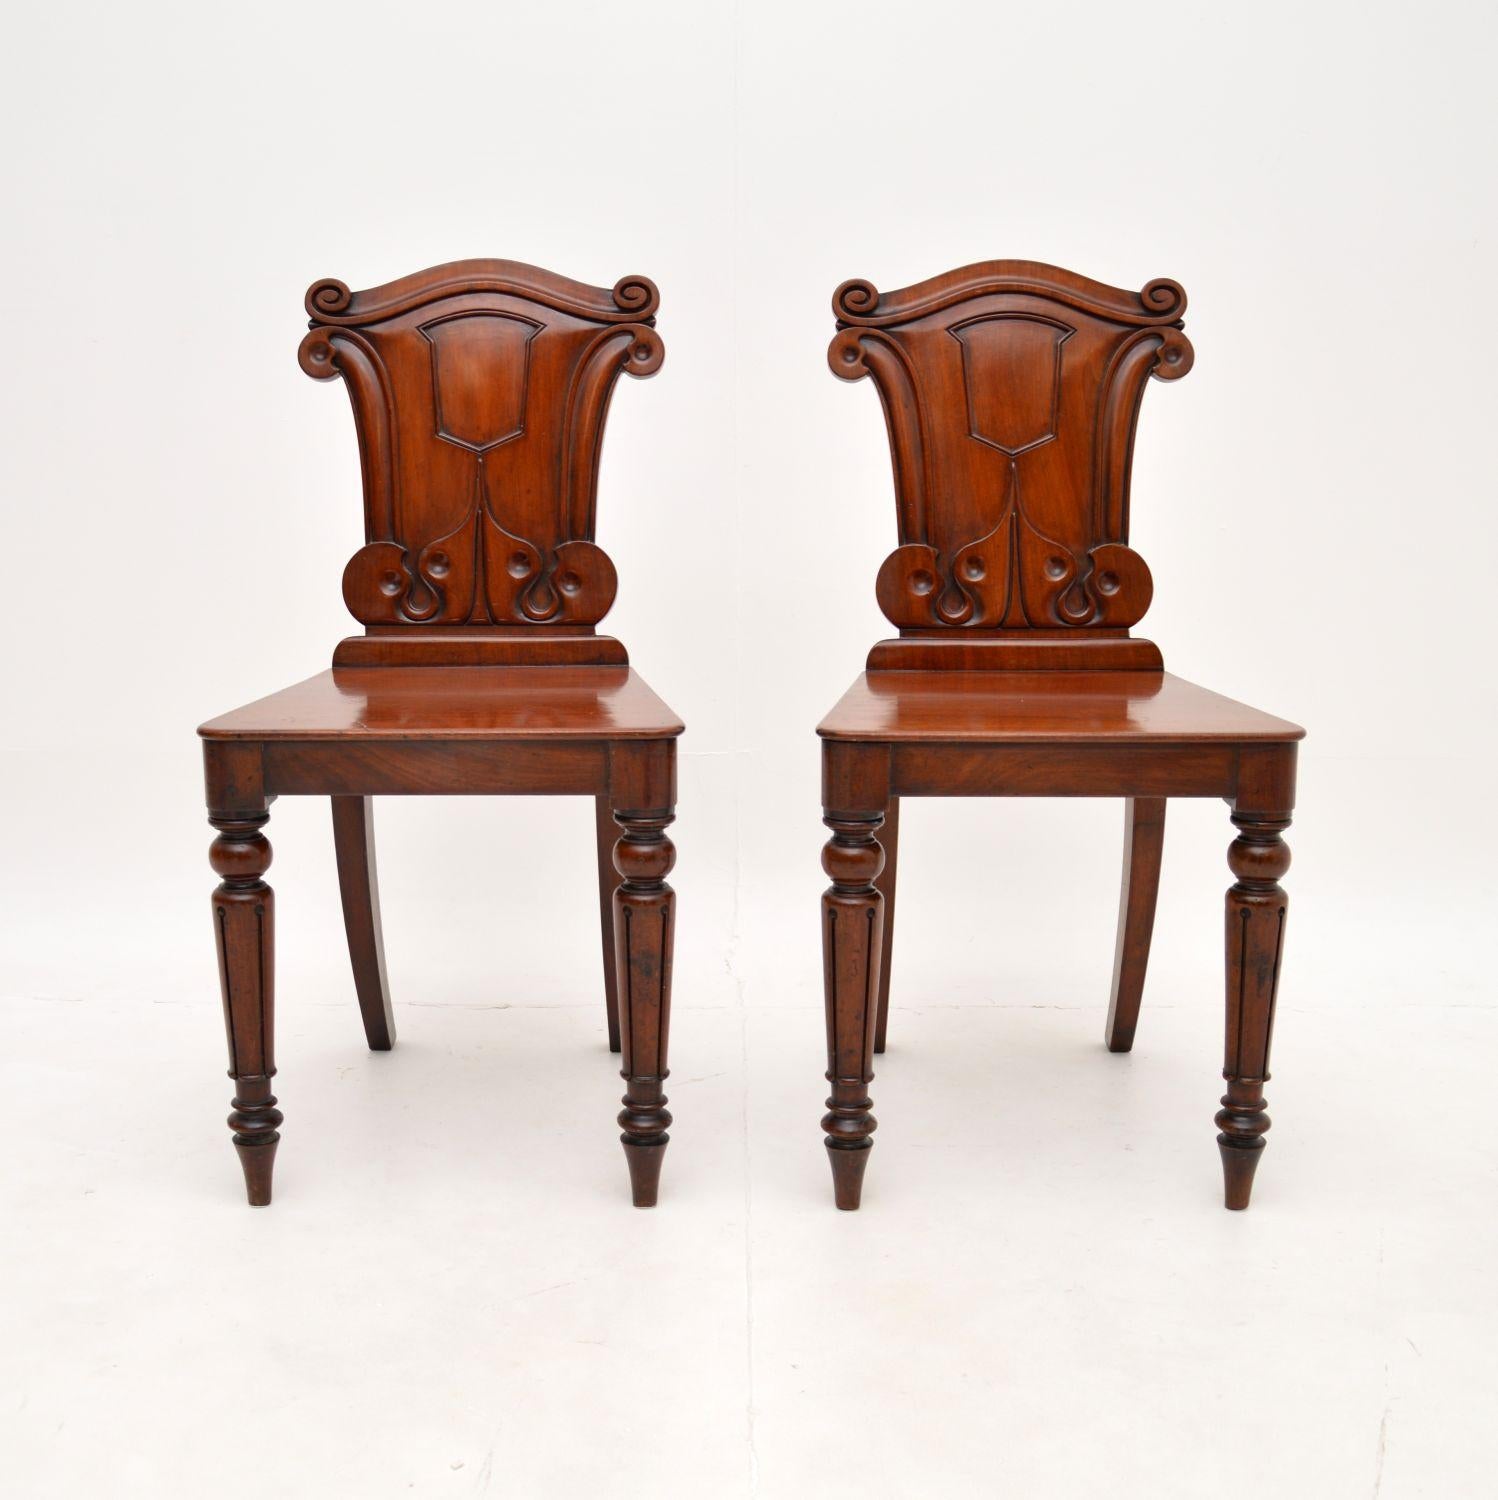 A lovely pair of antique William IV hall chairs. They were made in England, they date from the 1830-1840 period.

The quality is outstanding, they are beautifully constructed from solid wood with a gorgeous design and wonderful carving. They are a